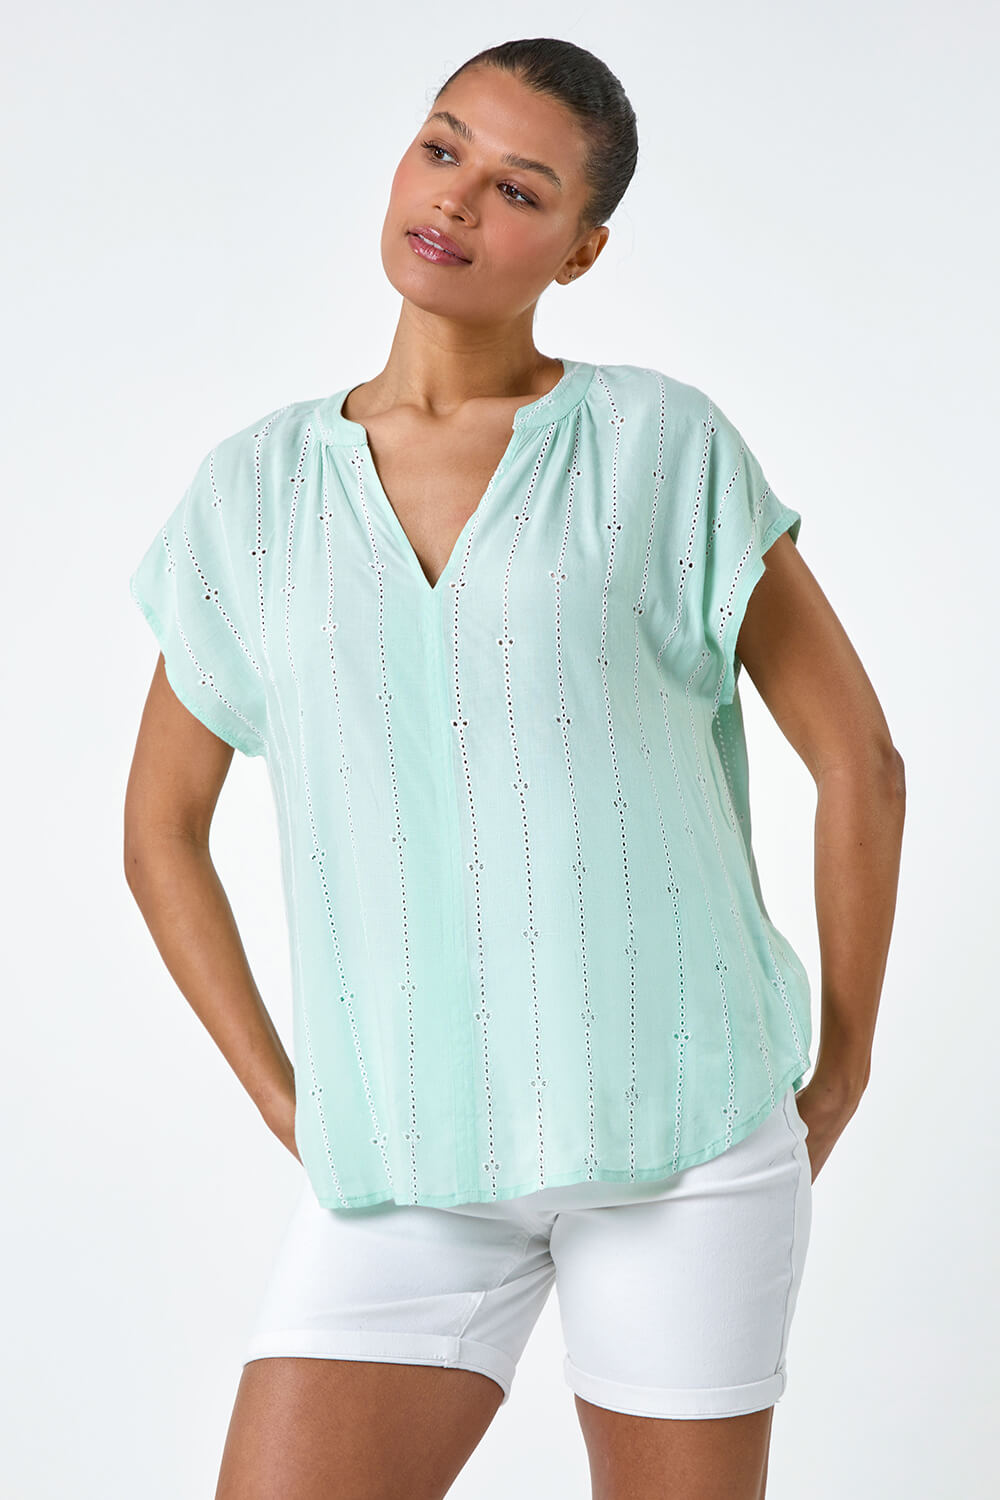 Mint Embroidered Stripe Notch Neck Top, Image 4 of 5